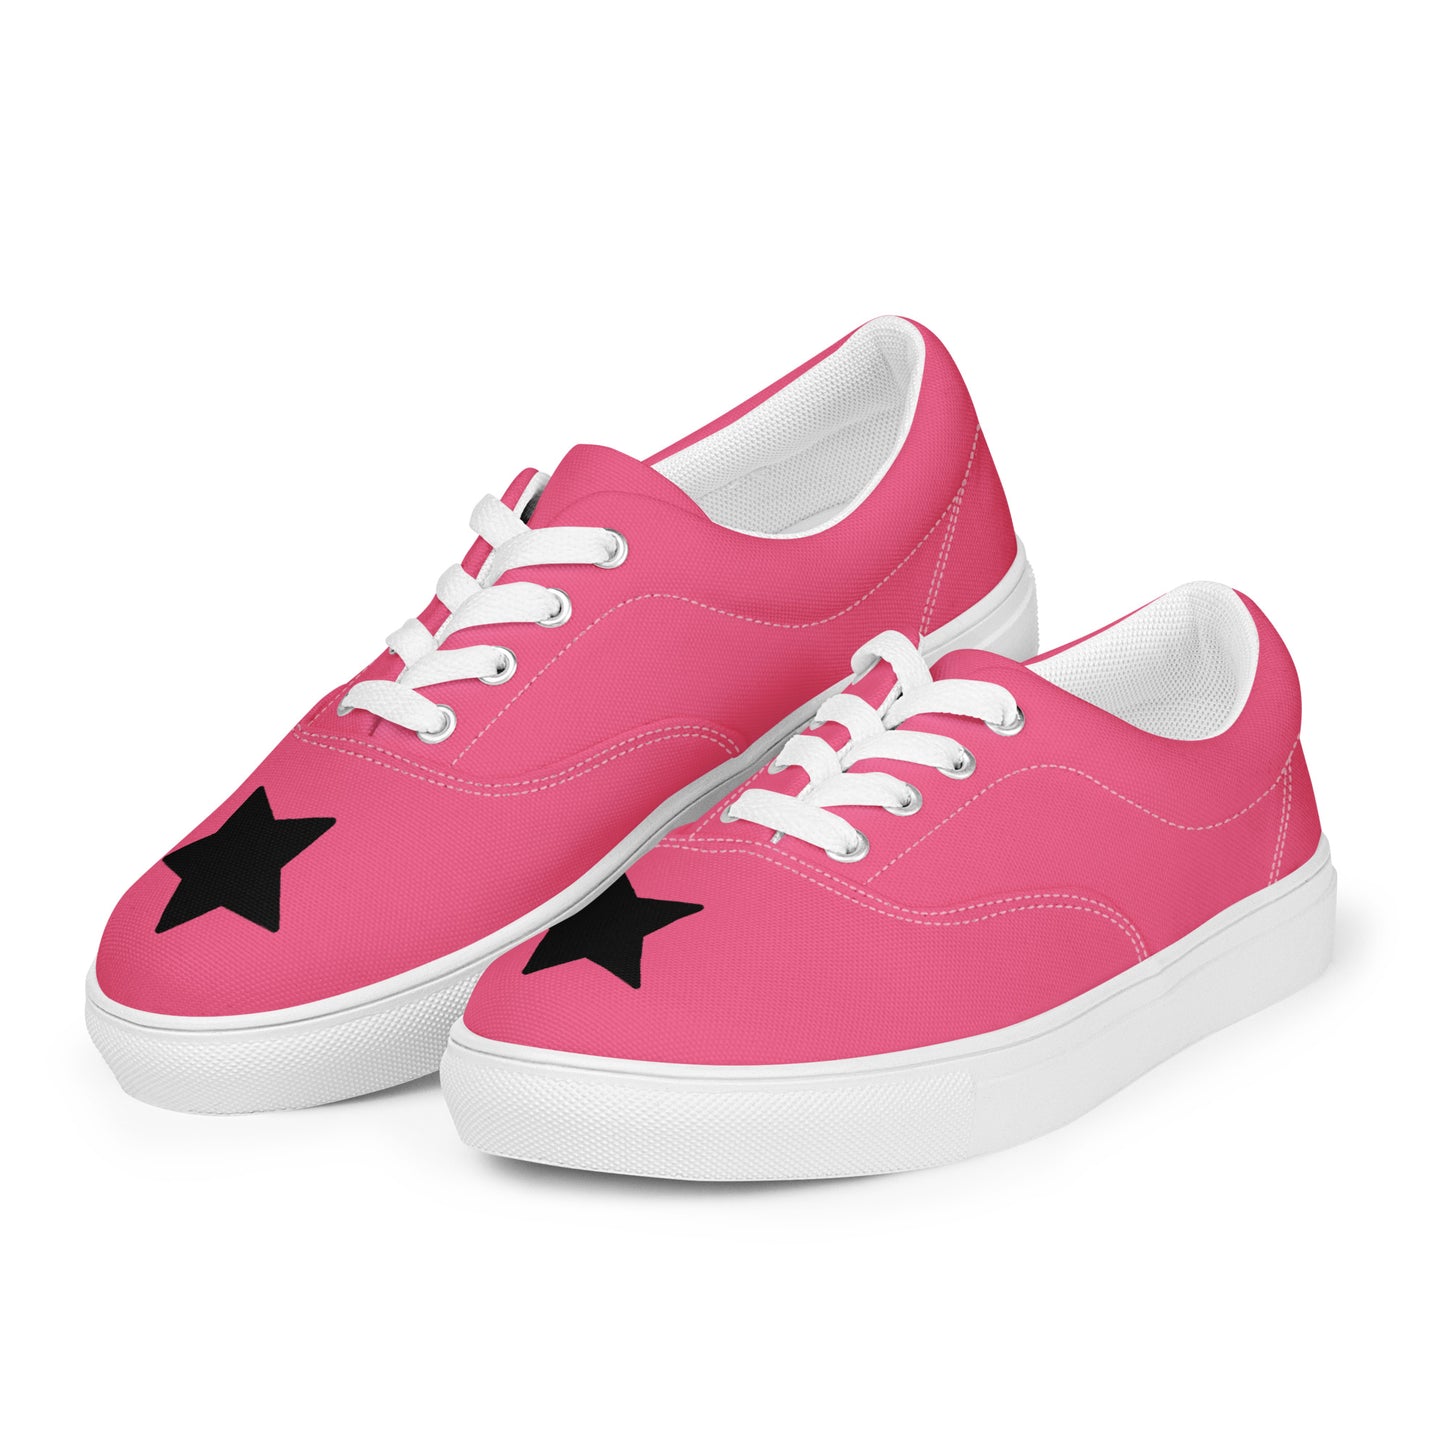 Women’s Black Star Pink Lace-up Canvas Shoes